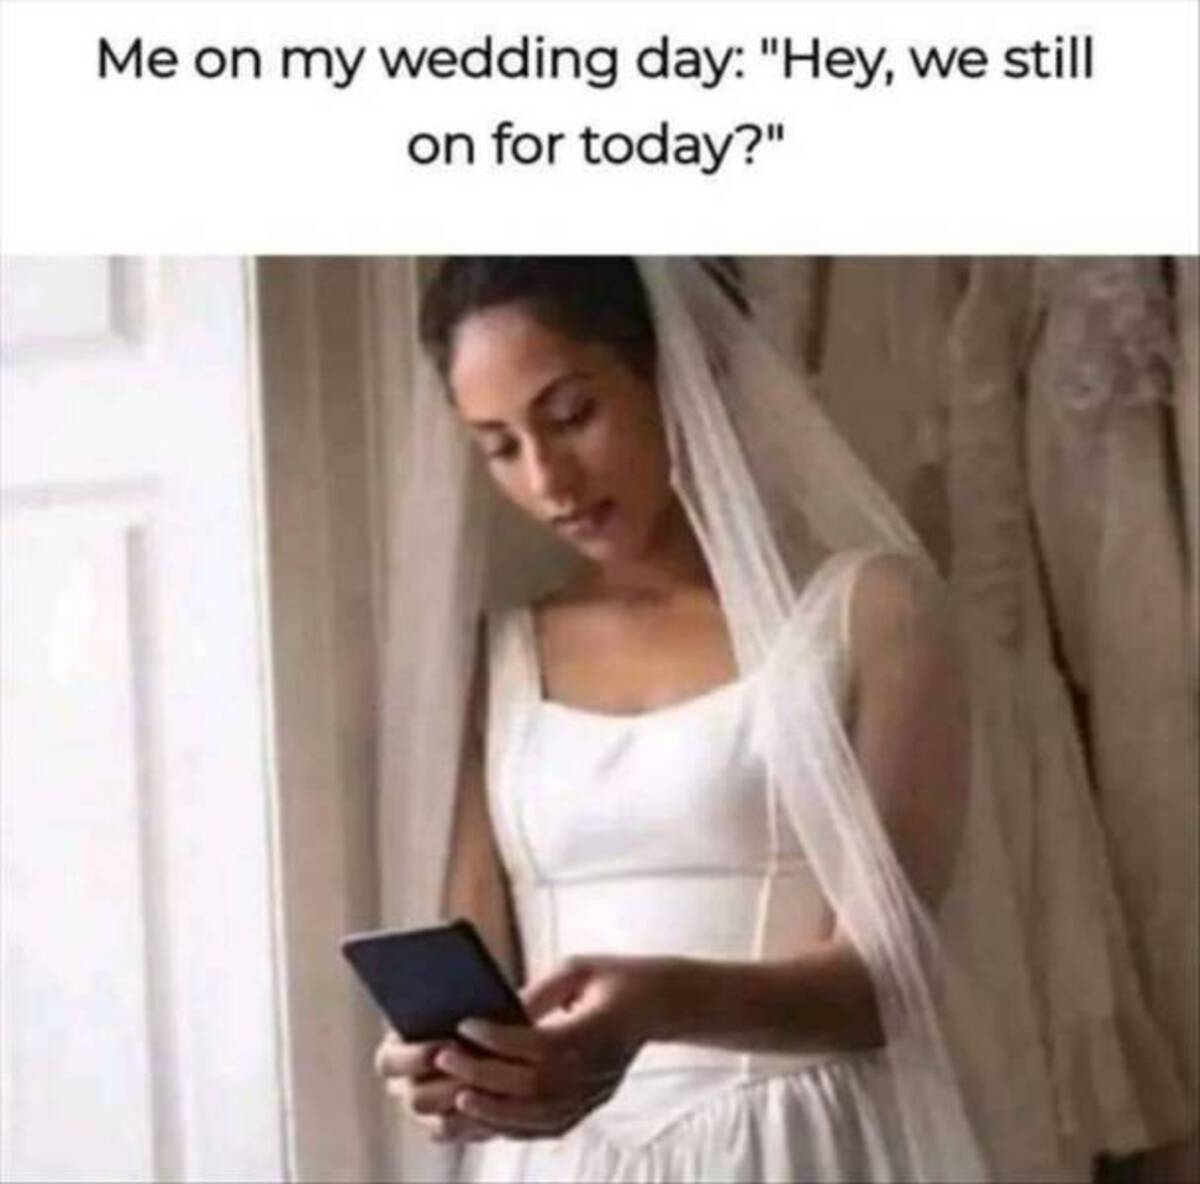 me on my wedding day are we still on - Me on my wedding day "Hey, we still on for today?"